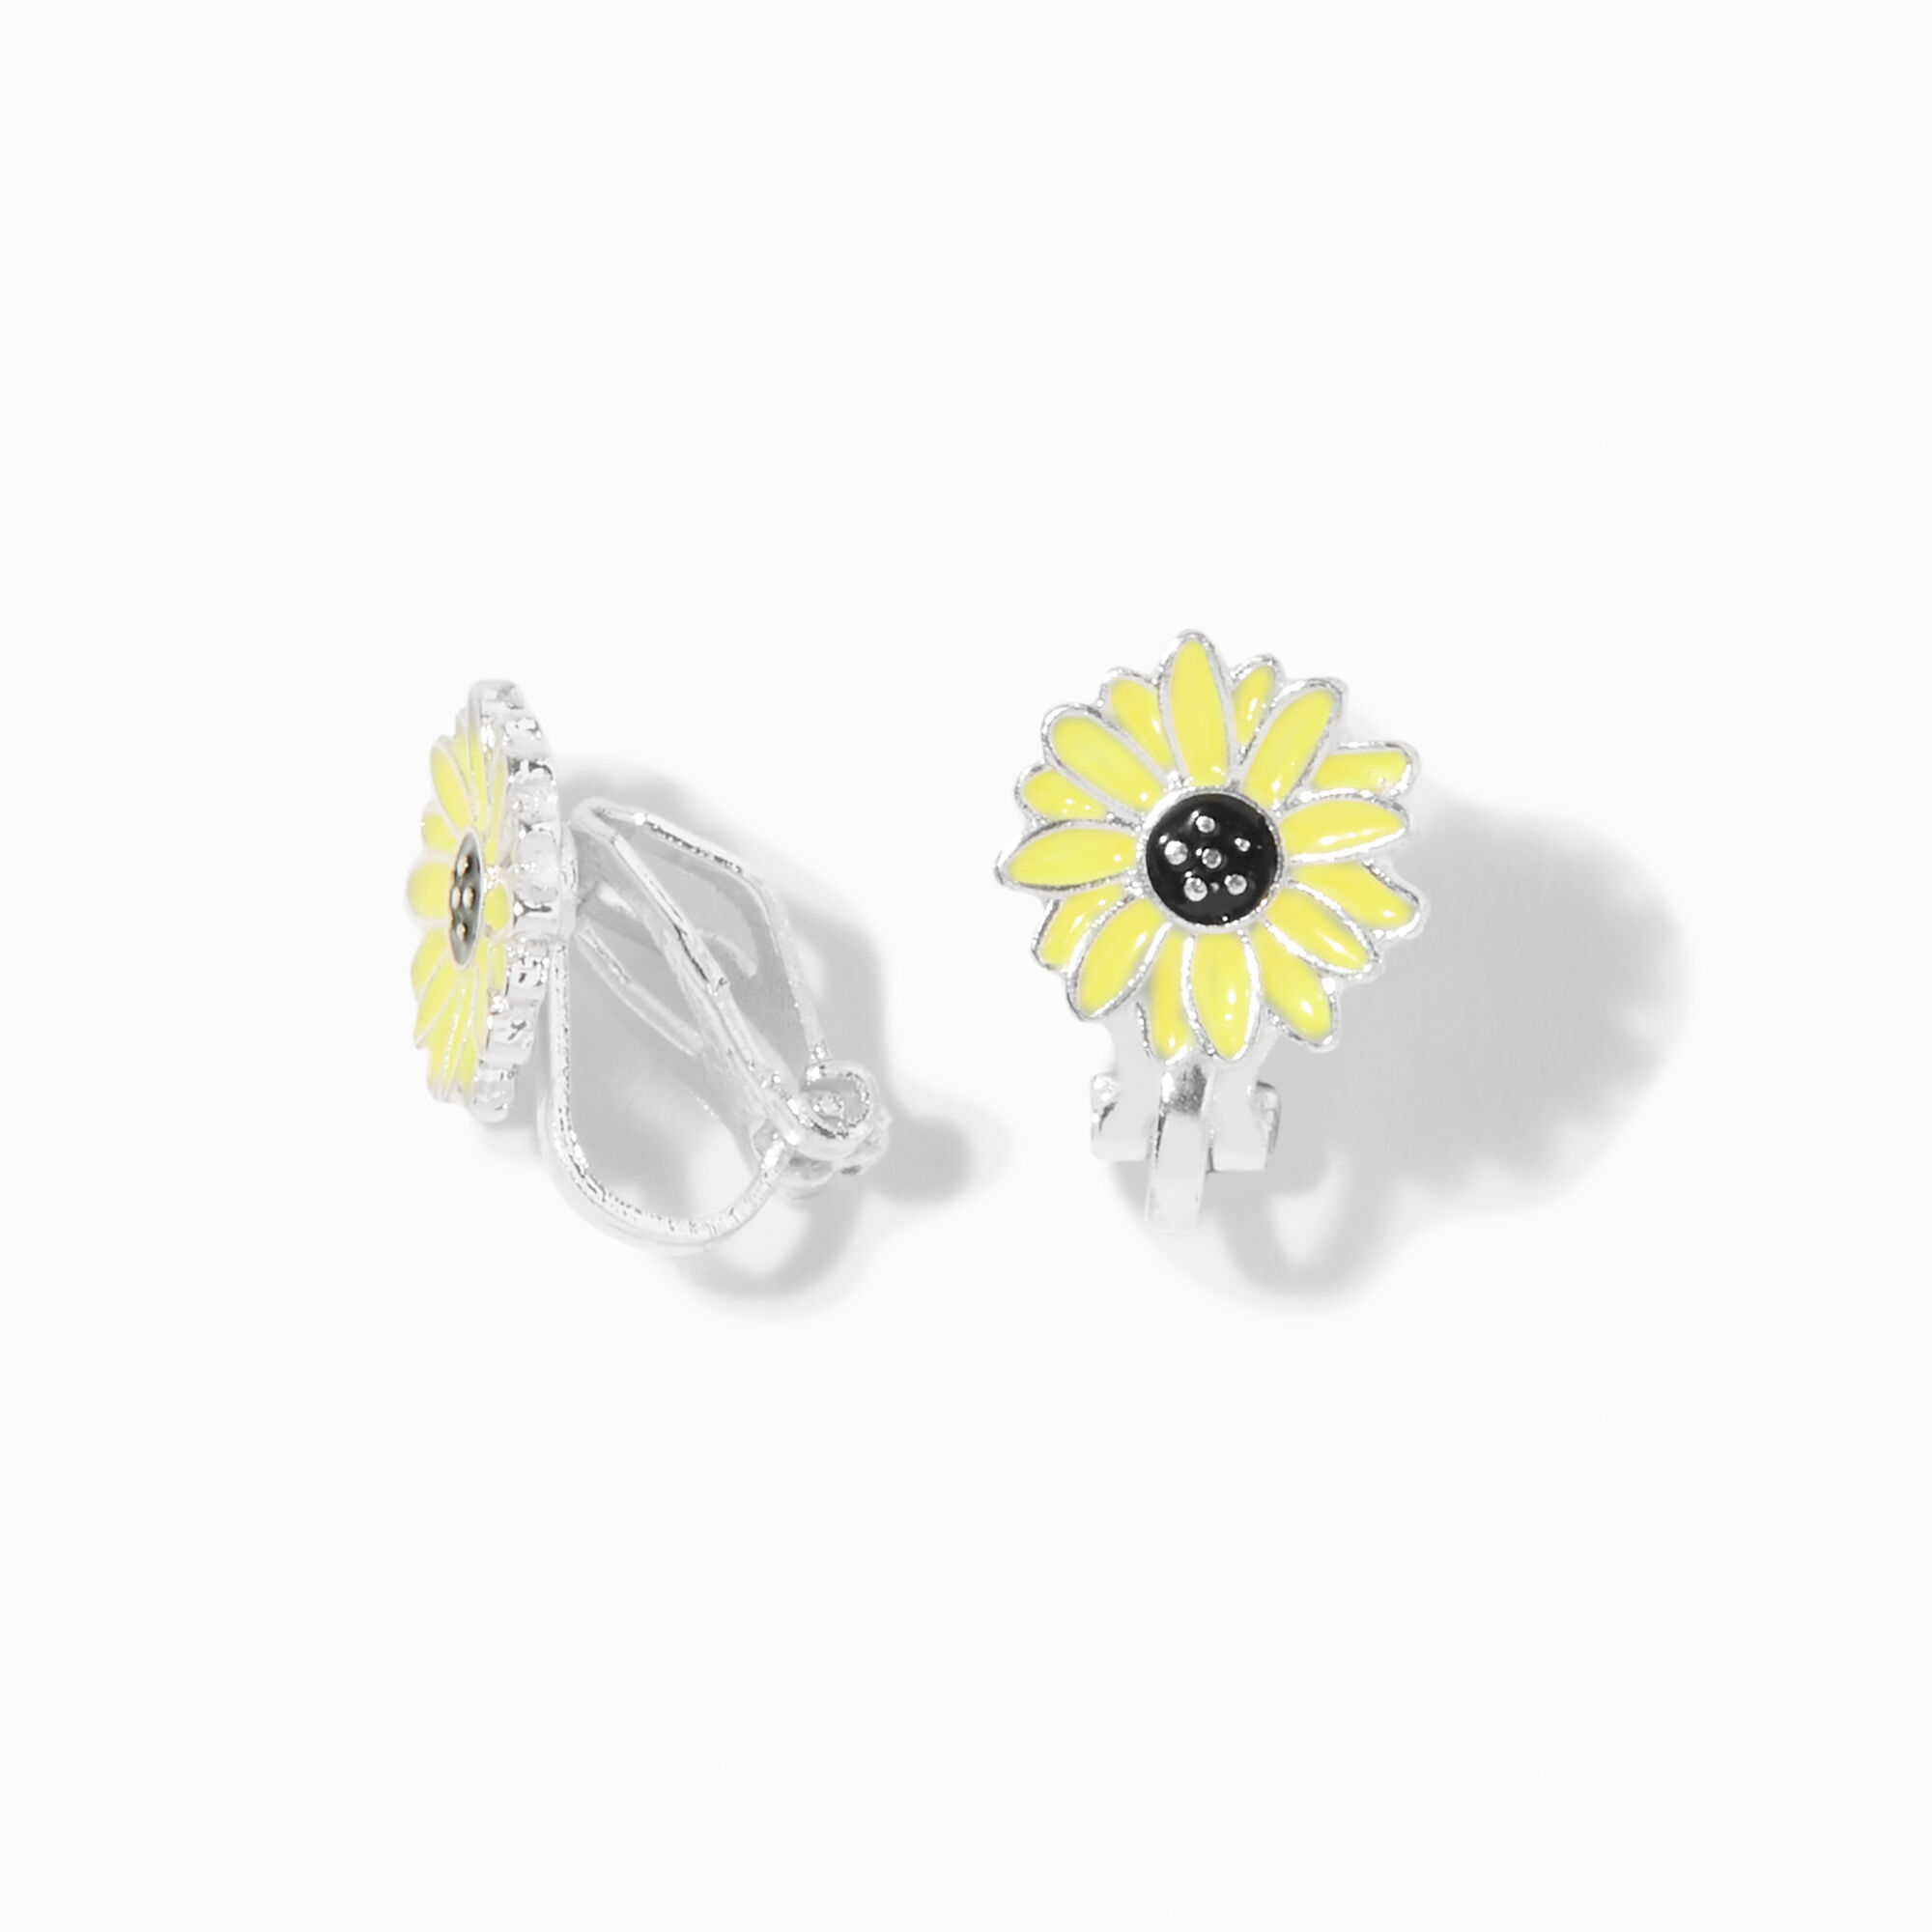 View Claires Enamel Sunflower Clip On Stud Earrings Yellow information